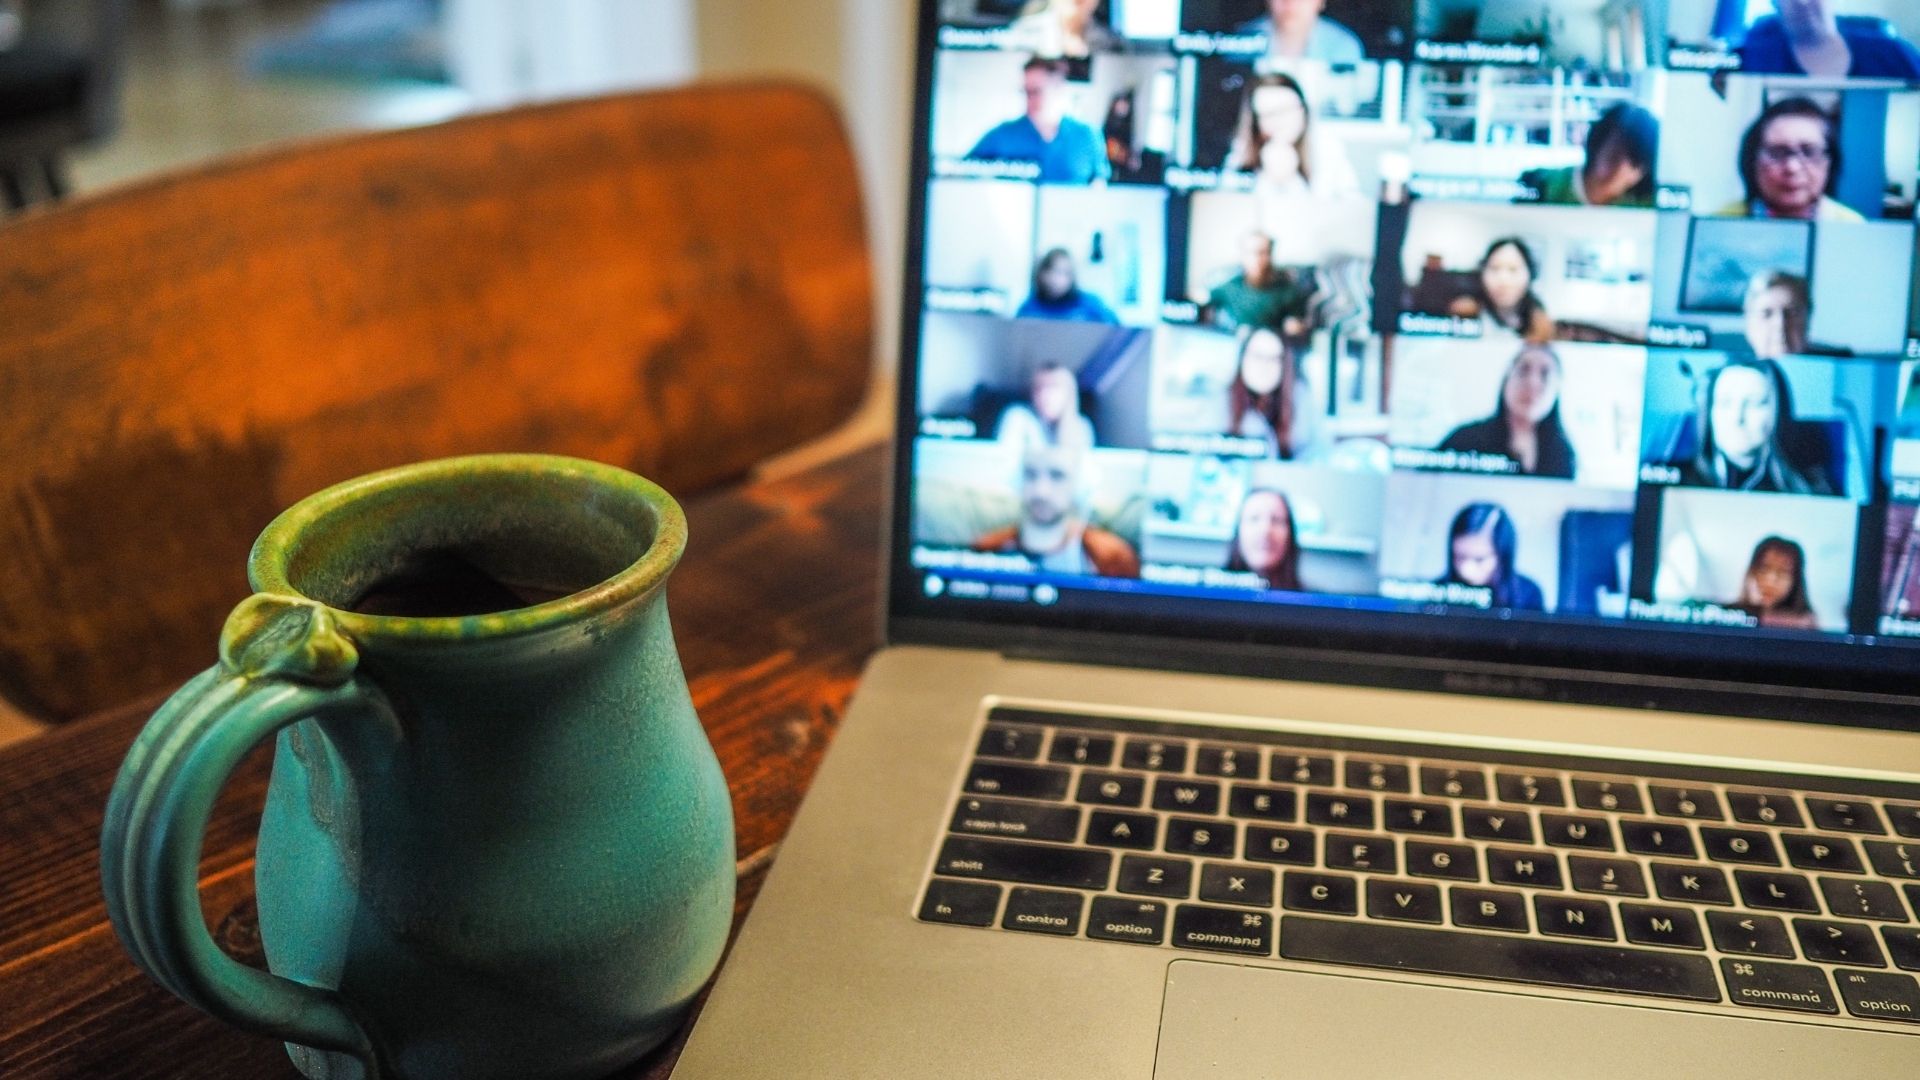 Computer screen showing a video call with many different attendees and a mug on the table.